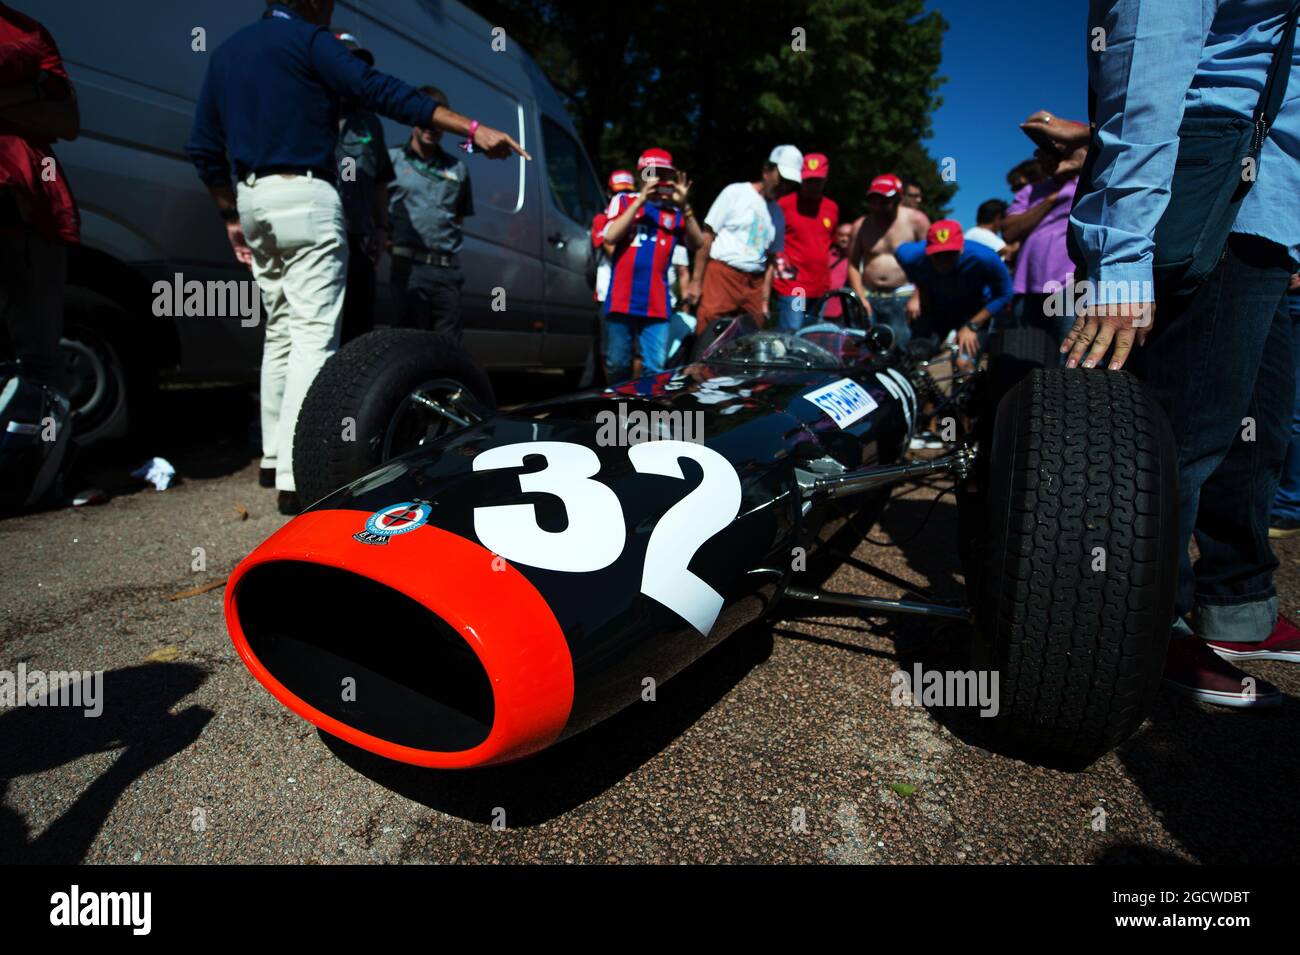 The BRM P261 that Jackie Stewart (GBR) drove to his first Grand Prix victory at the 1965 Italian GP. Italian Grand Prix, Saturday 5th September 2015. Monza Italy. Stock Photo